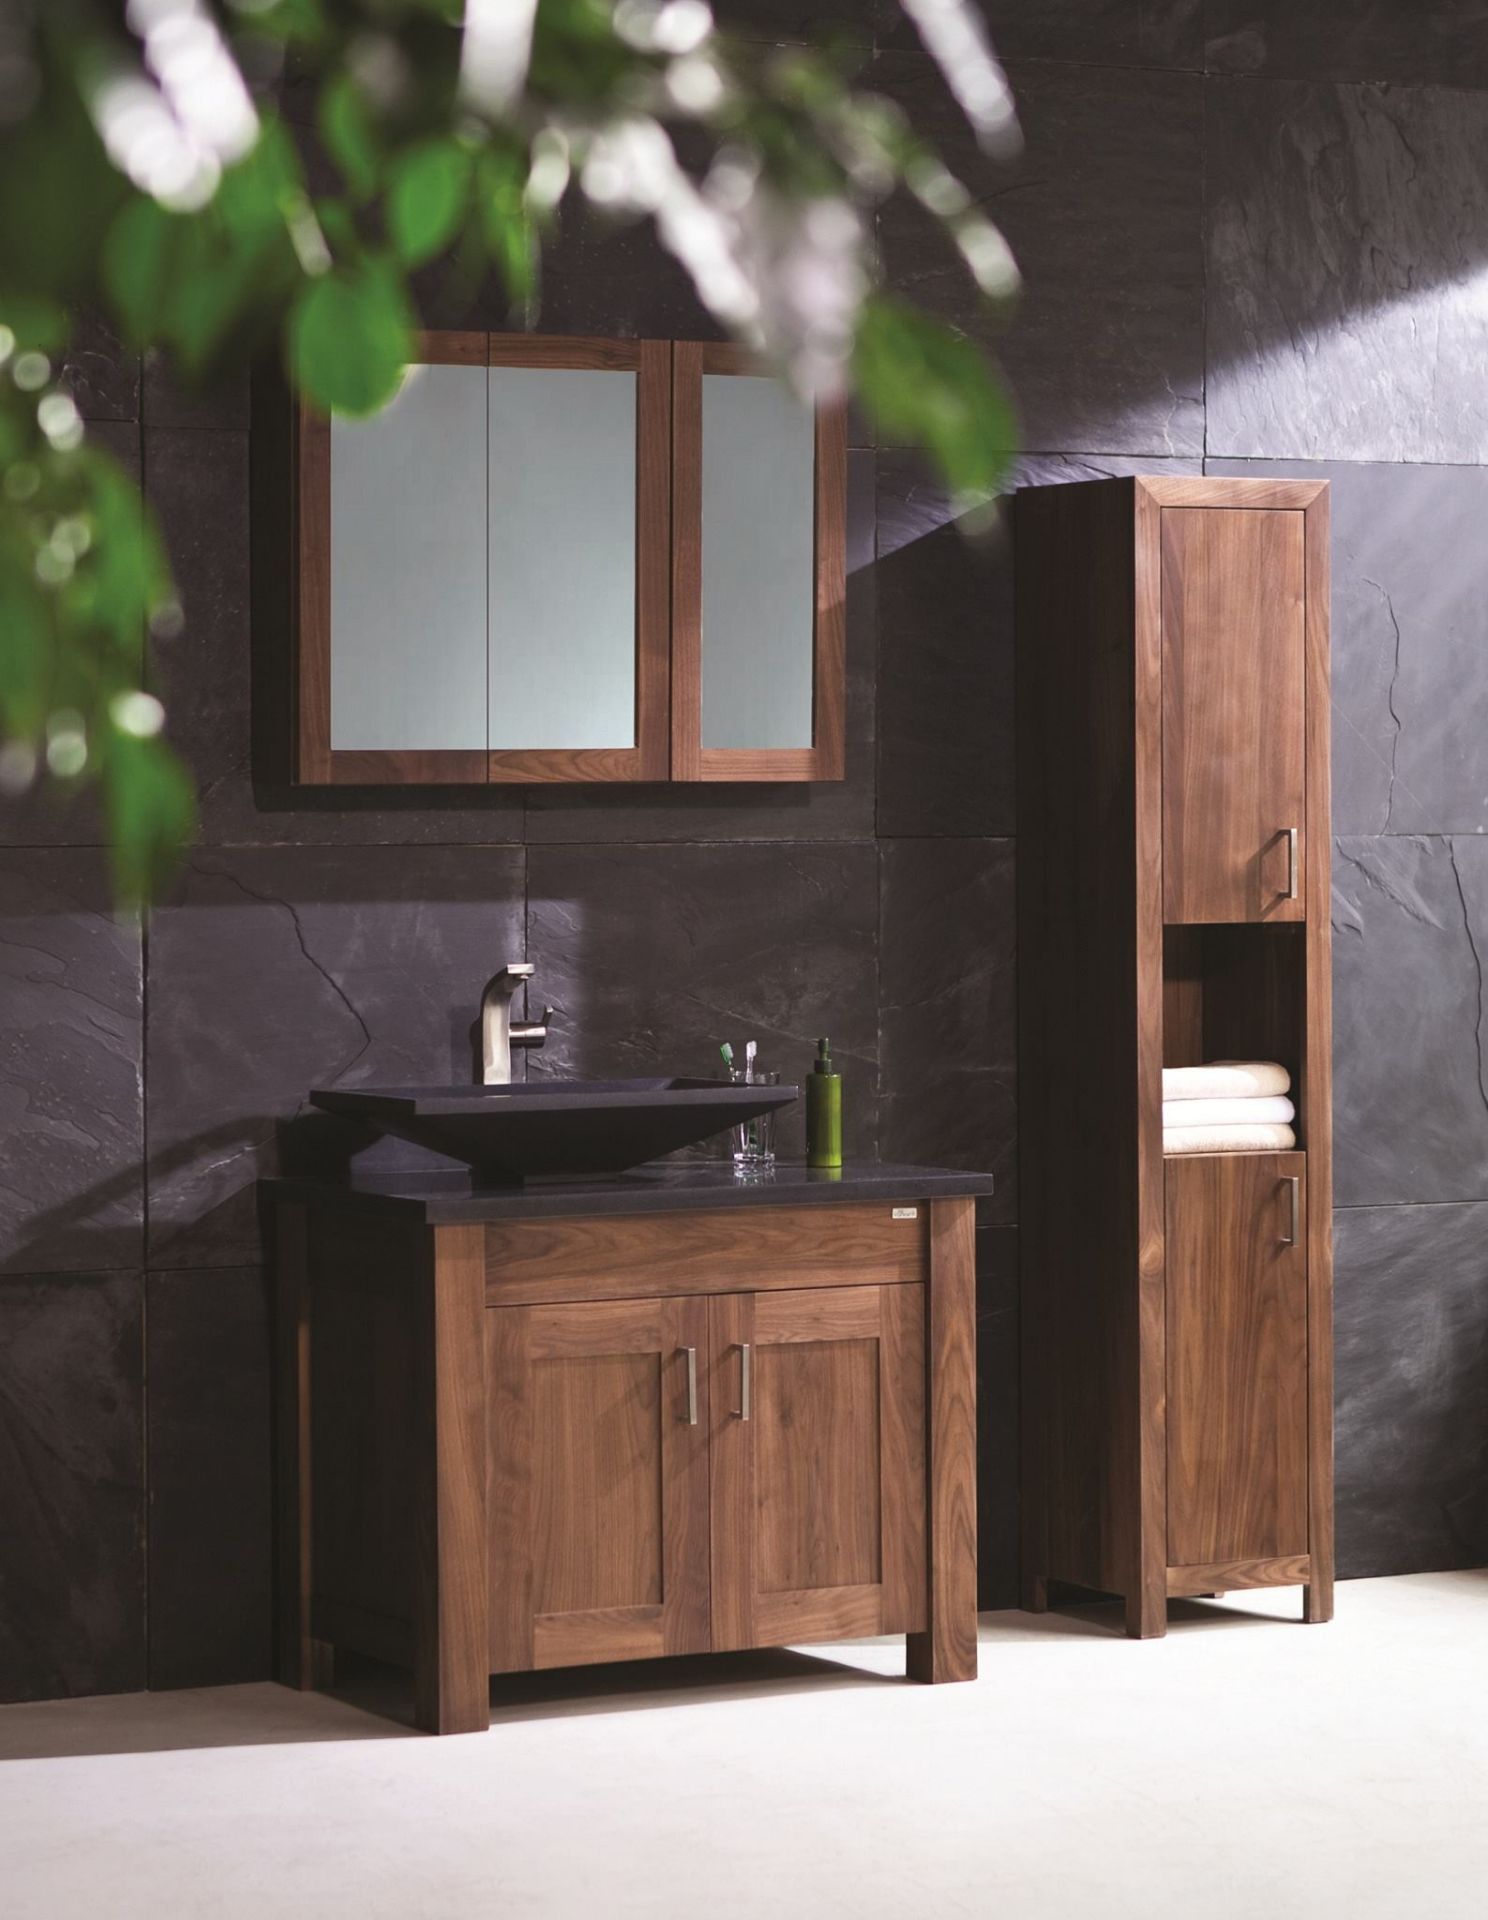 1 x Stonearth 'Finesse' Countertop Washstand - American Solid Walnut - Original RRP £1,400 - Image 4 of 10